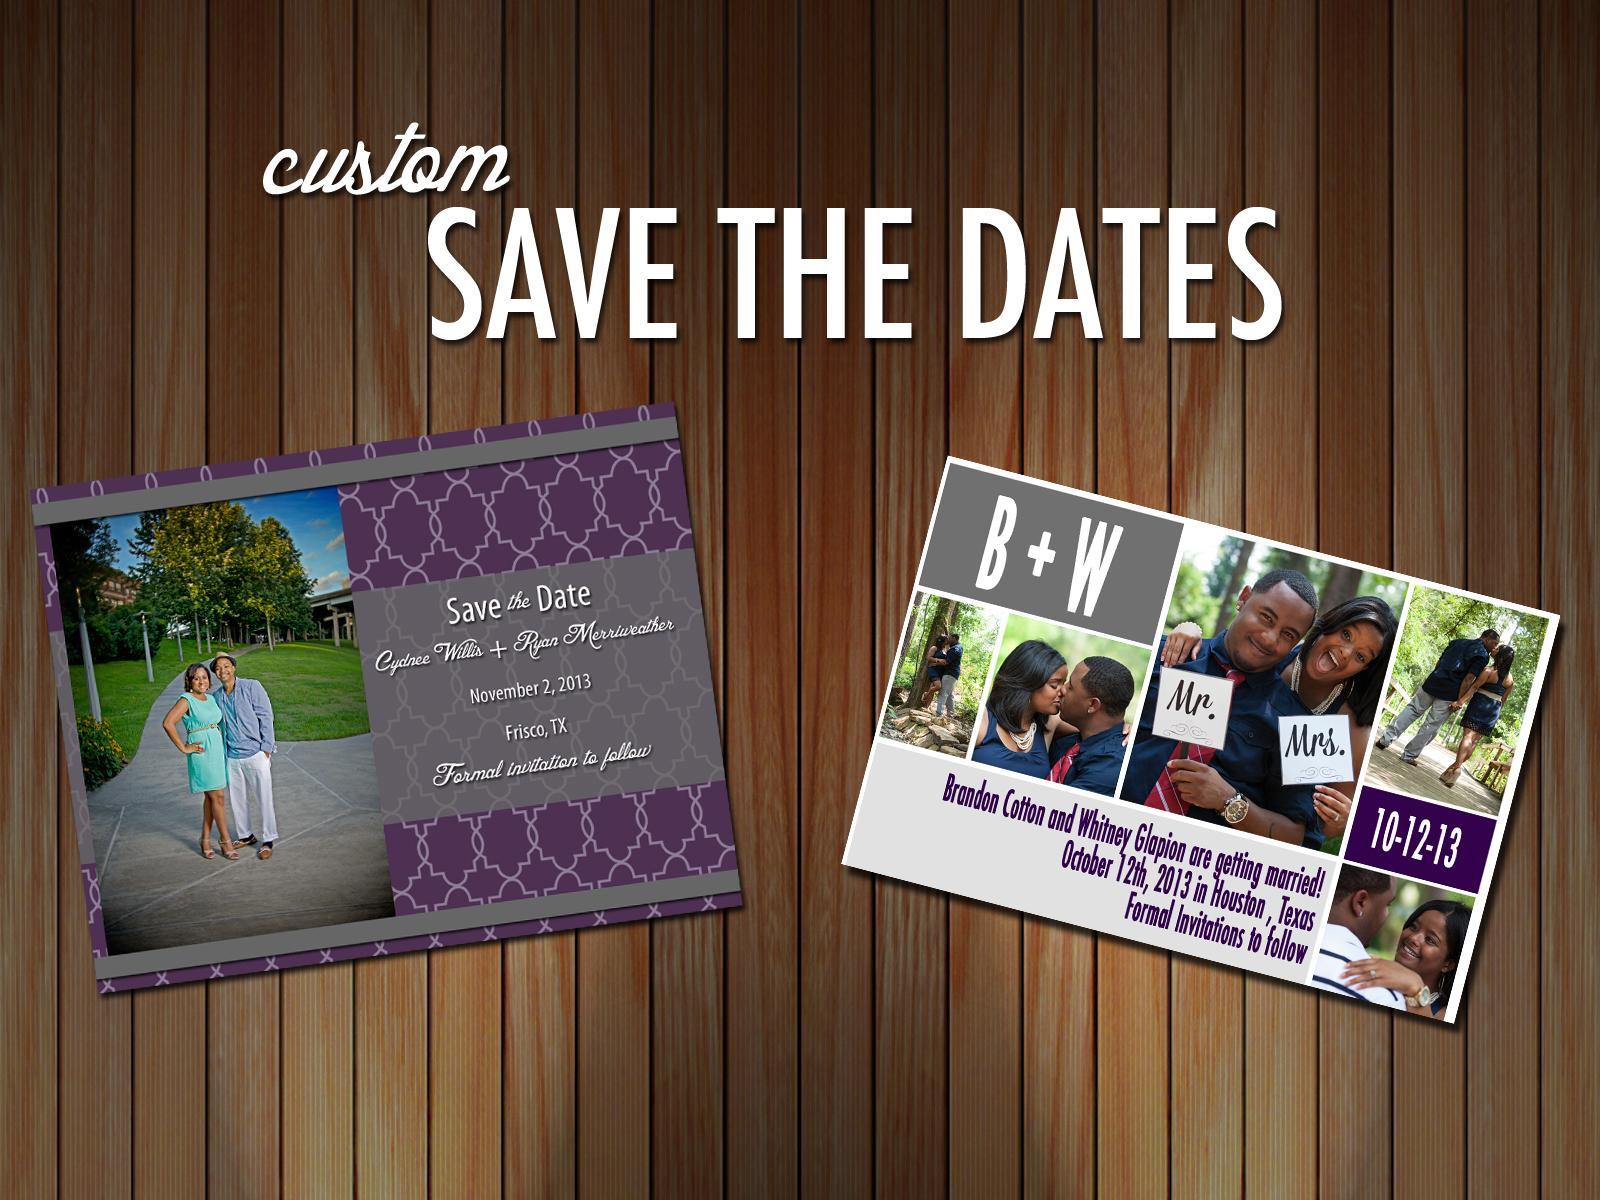 Are those template websites giving you the blues?  Show us your vision and we will create your custom Save The Dates. 4 day Turnaround!